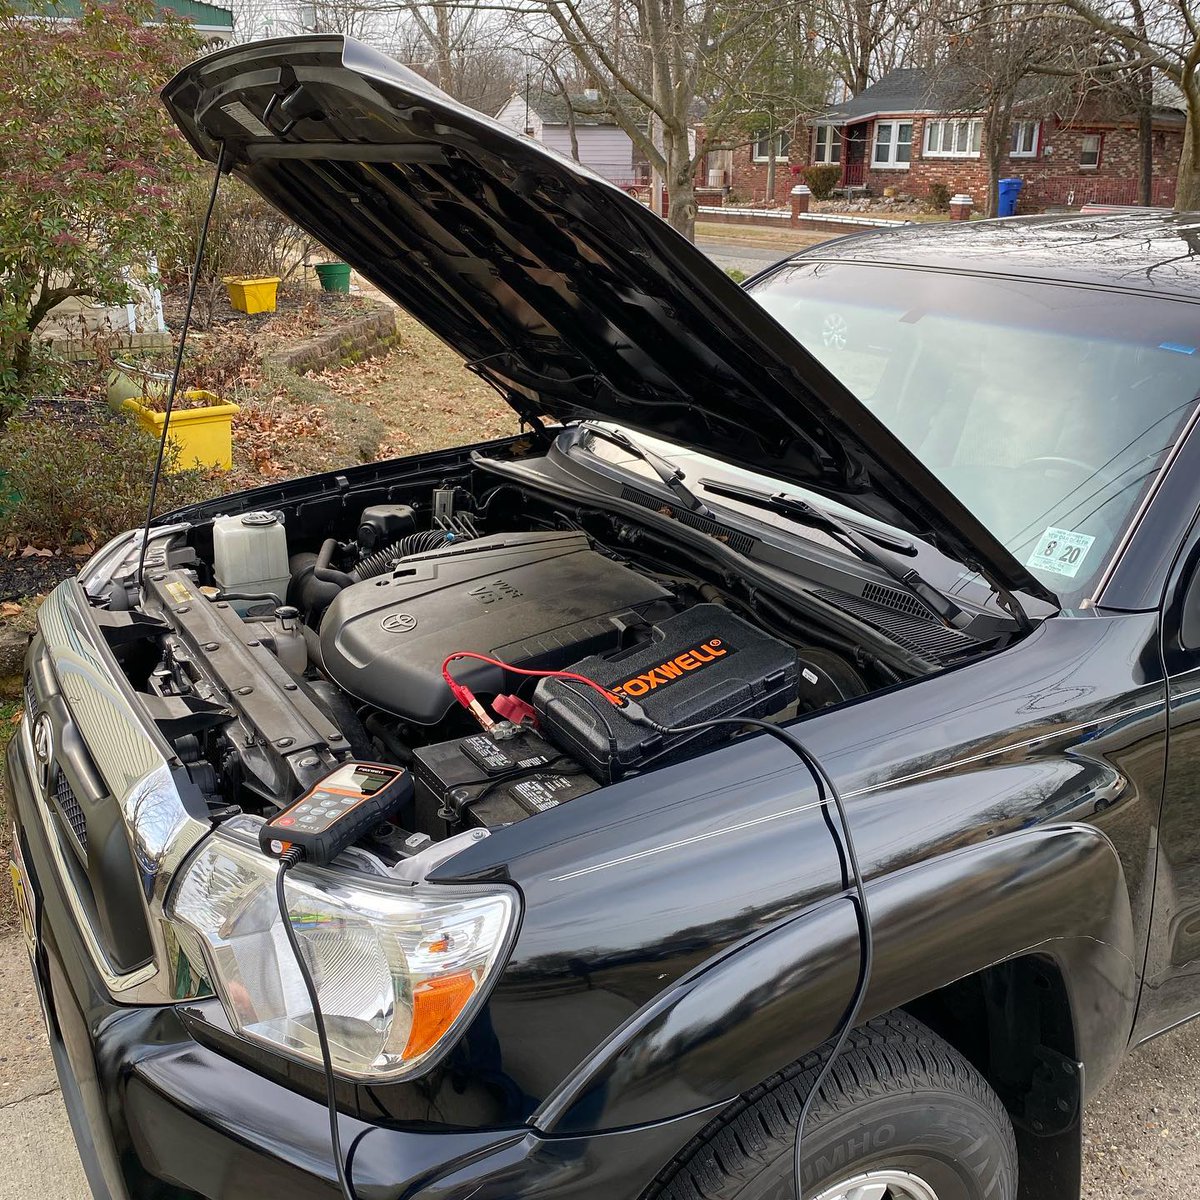 Tested this battery and charging system this afternoon to find that the battery needs to be replaced and the charging system is at 100%. #roadside #roadsideservice #roadsideassitance #roadsideassistance24 #jumpstart #deadbattery #battery #batterytester #toyota #toyotatacoma #nj